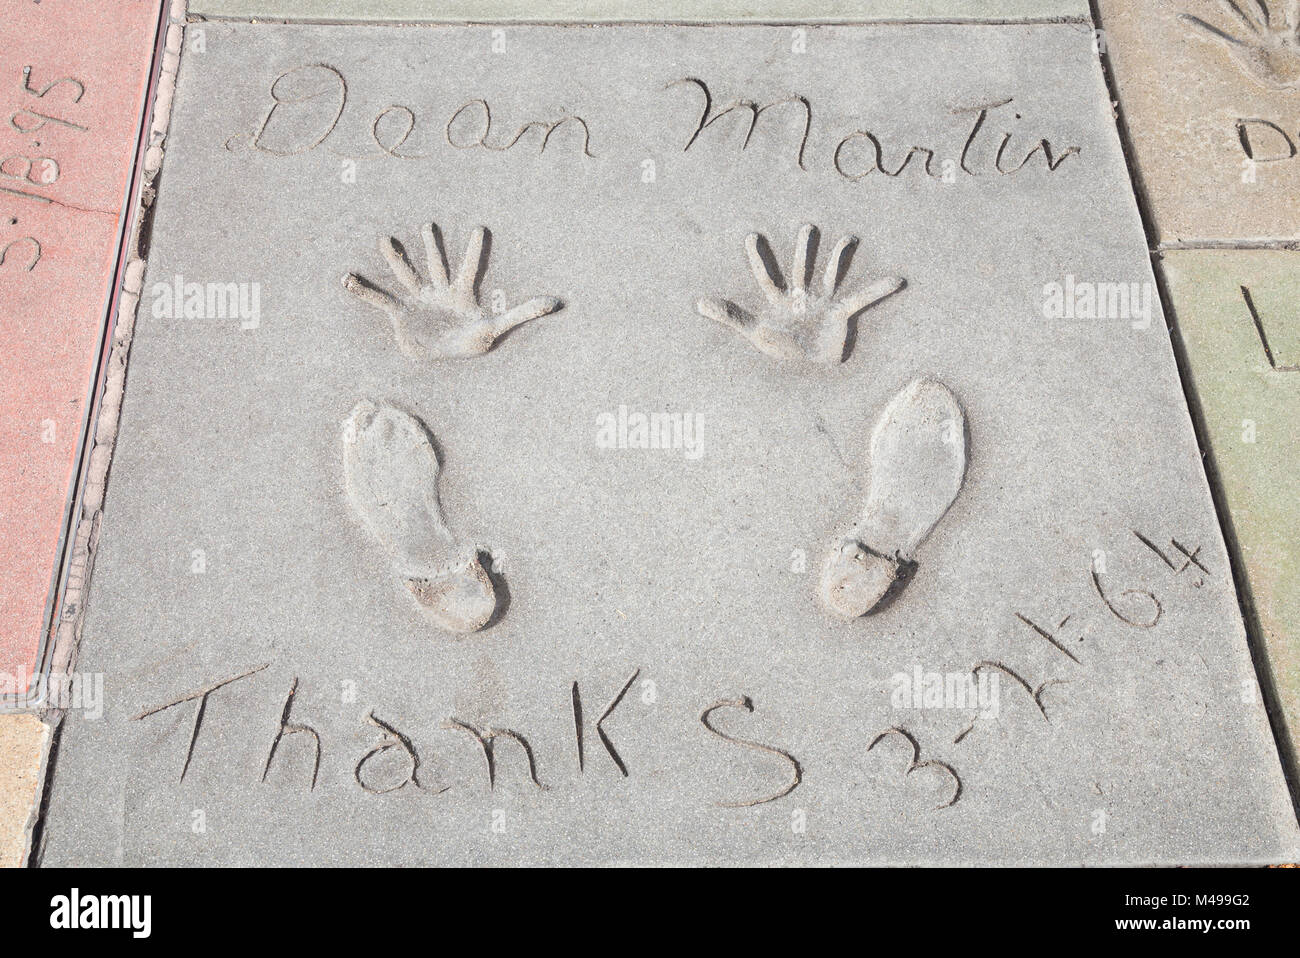 Dean Martin's hand and foot prints at Grauman's Chinese Theatre forecourt, Hollywood, California, USA Stock Photo